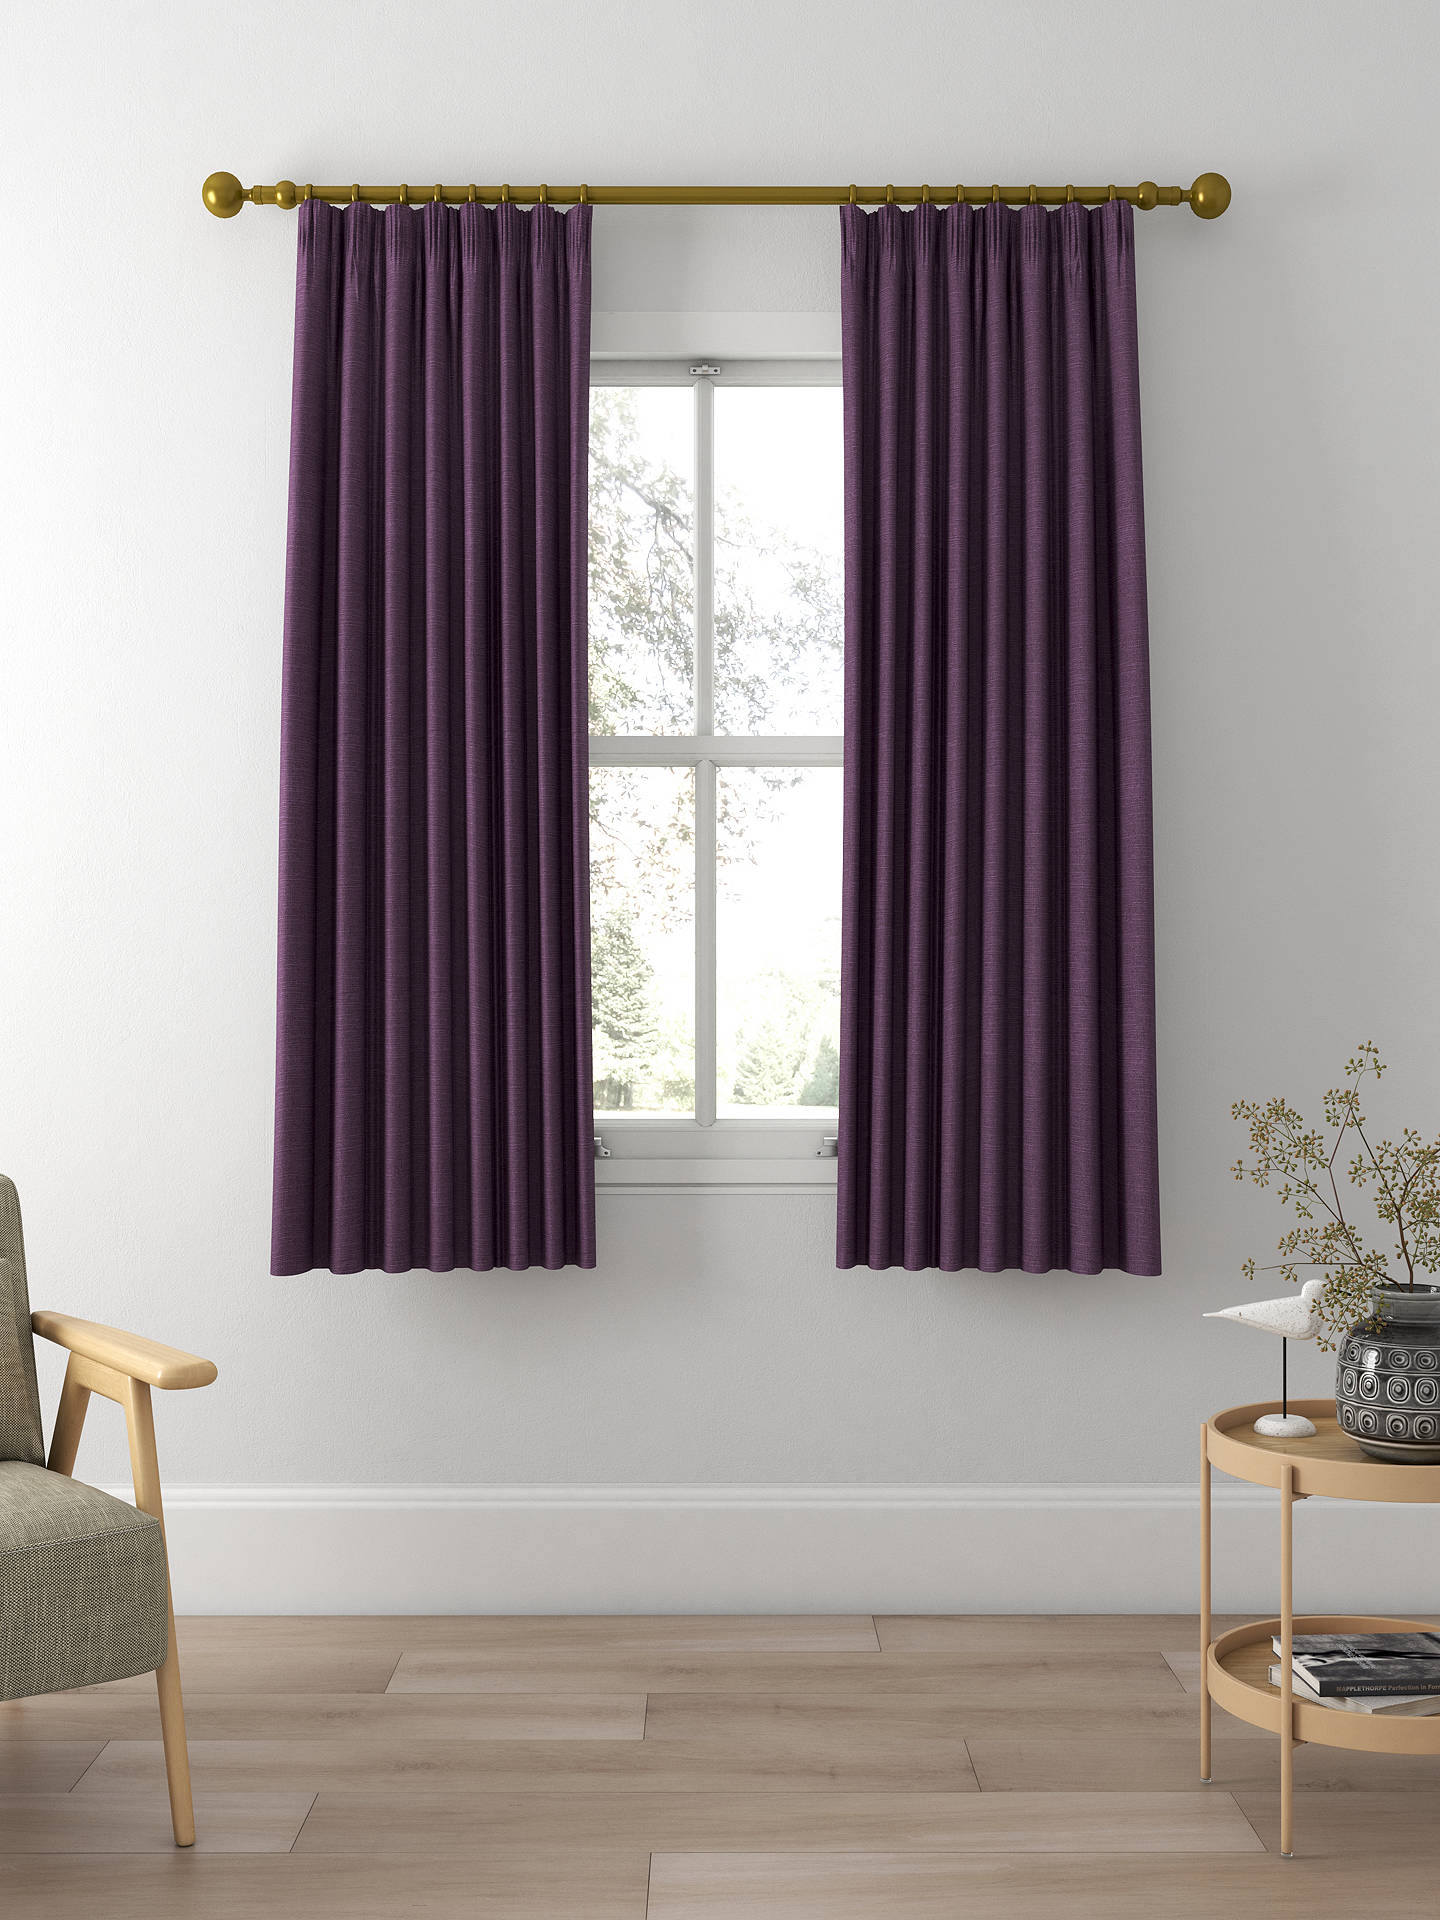 Sanderson Tuscany II Made to Measure Curtains, Thistle